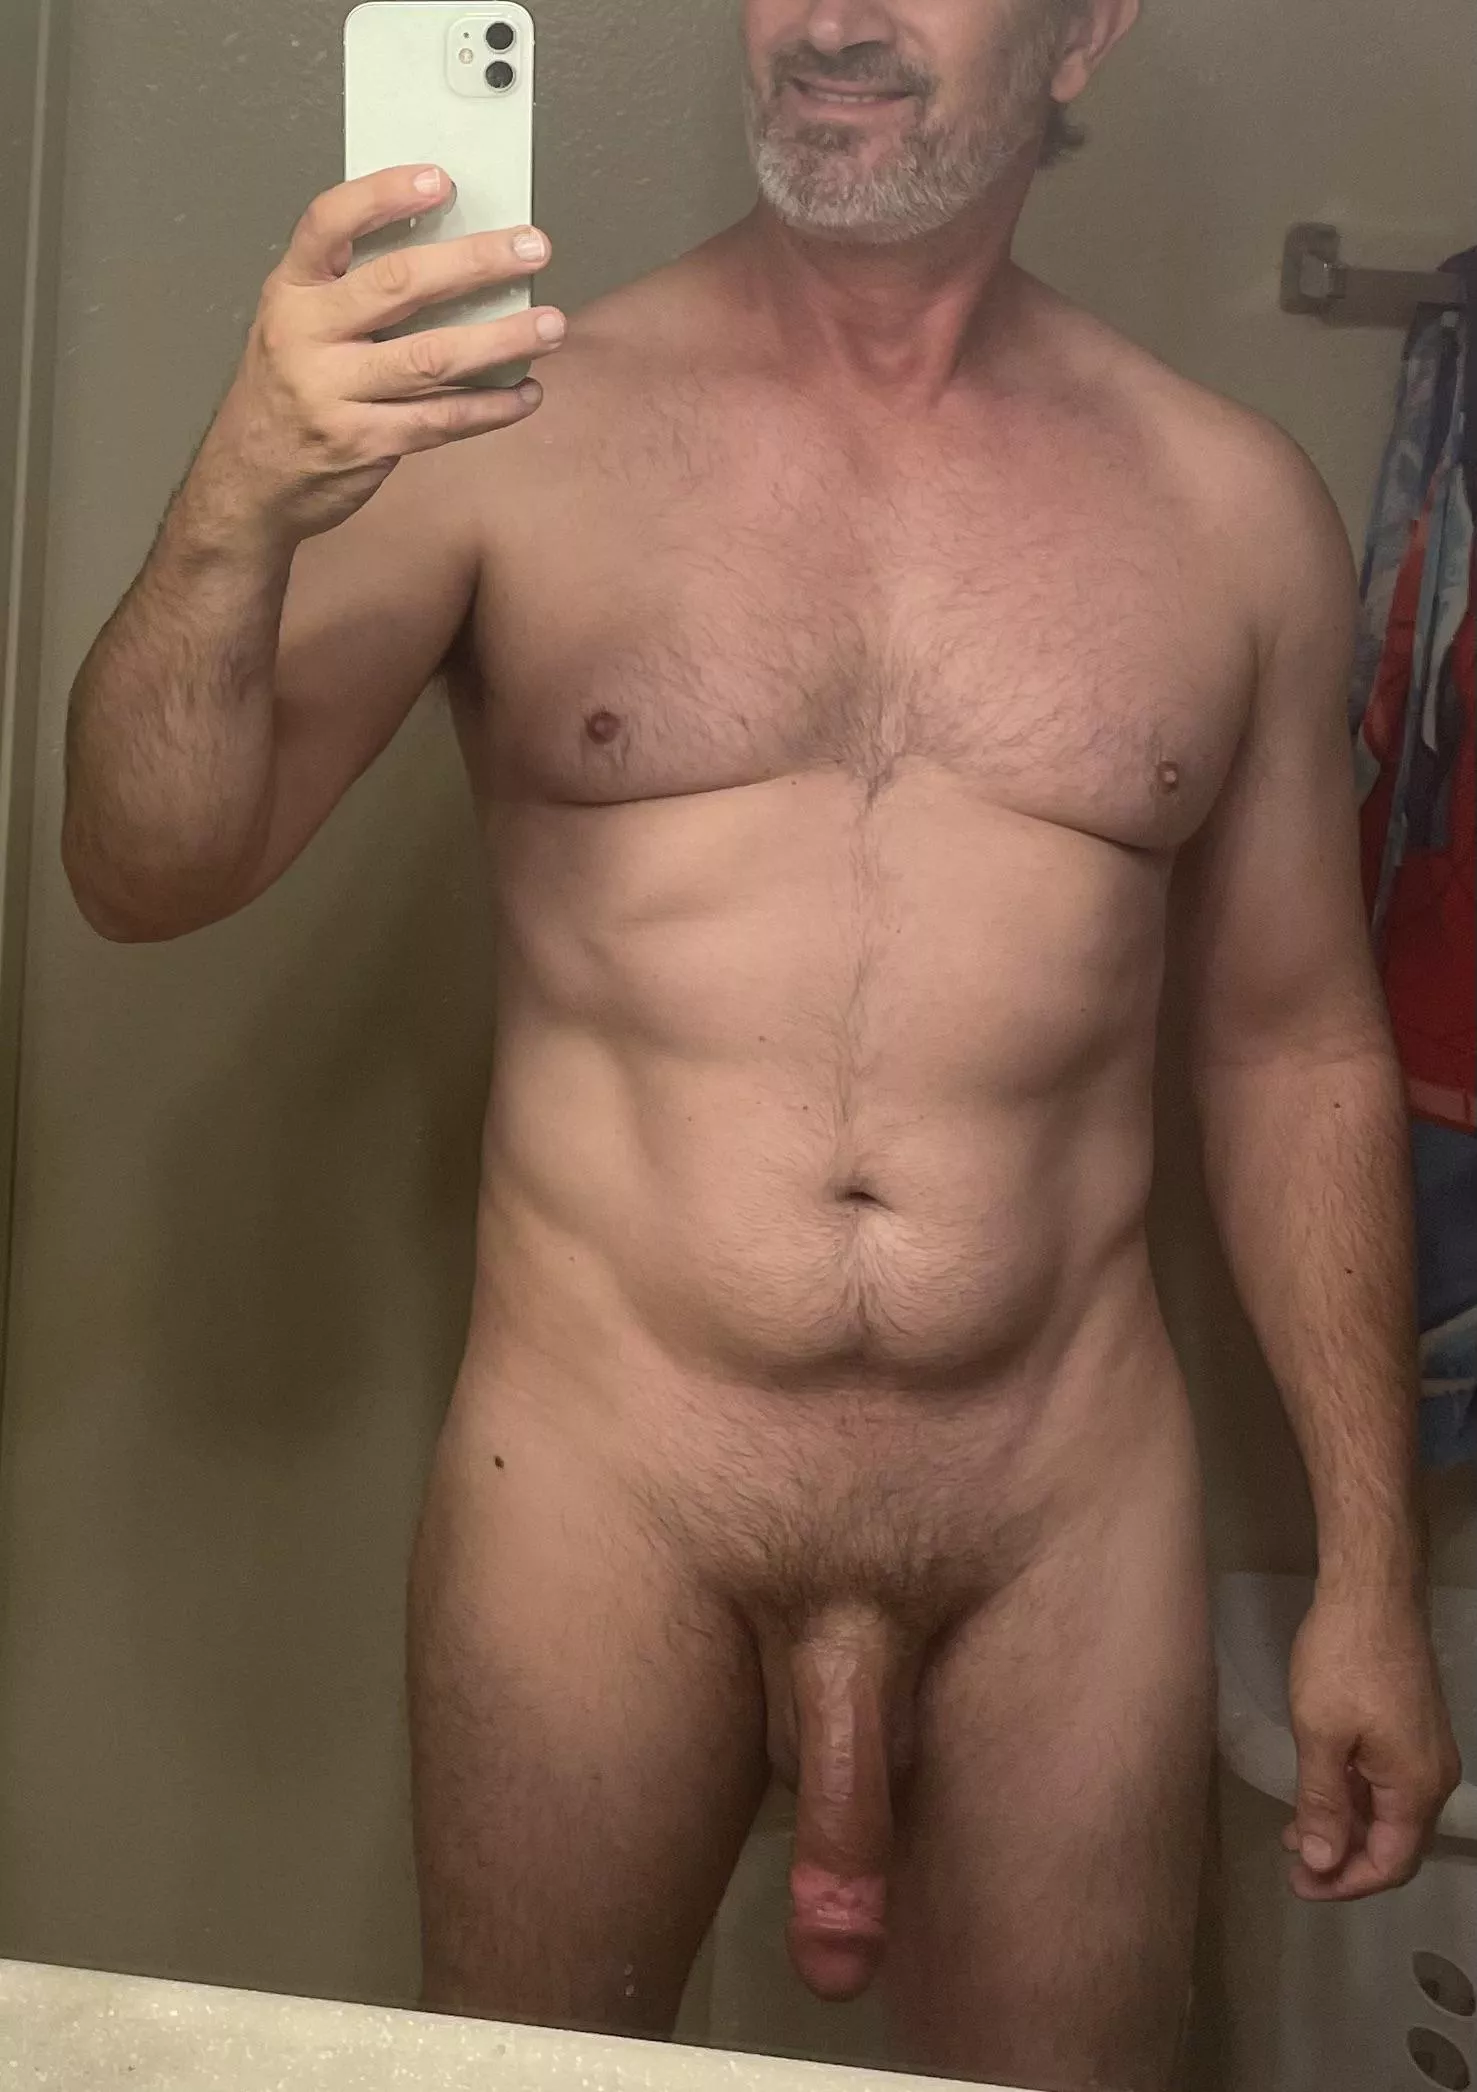 cameron melvin share dirty old naked men photos